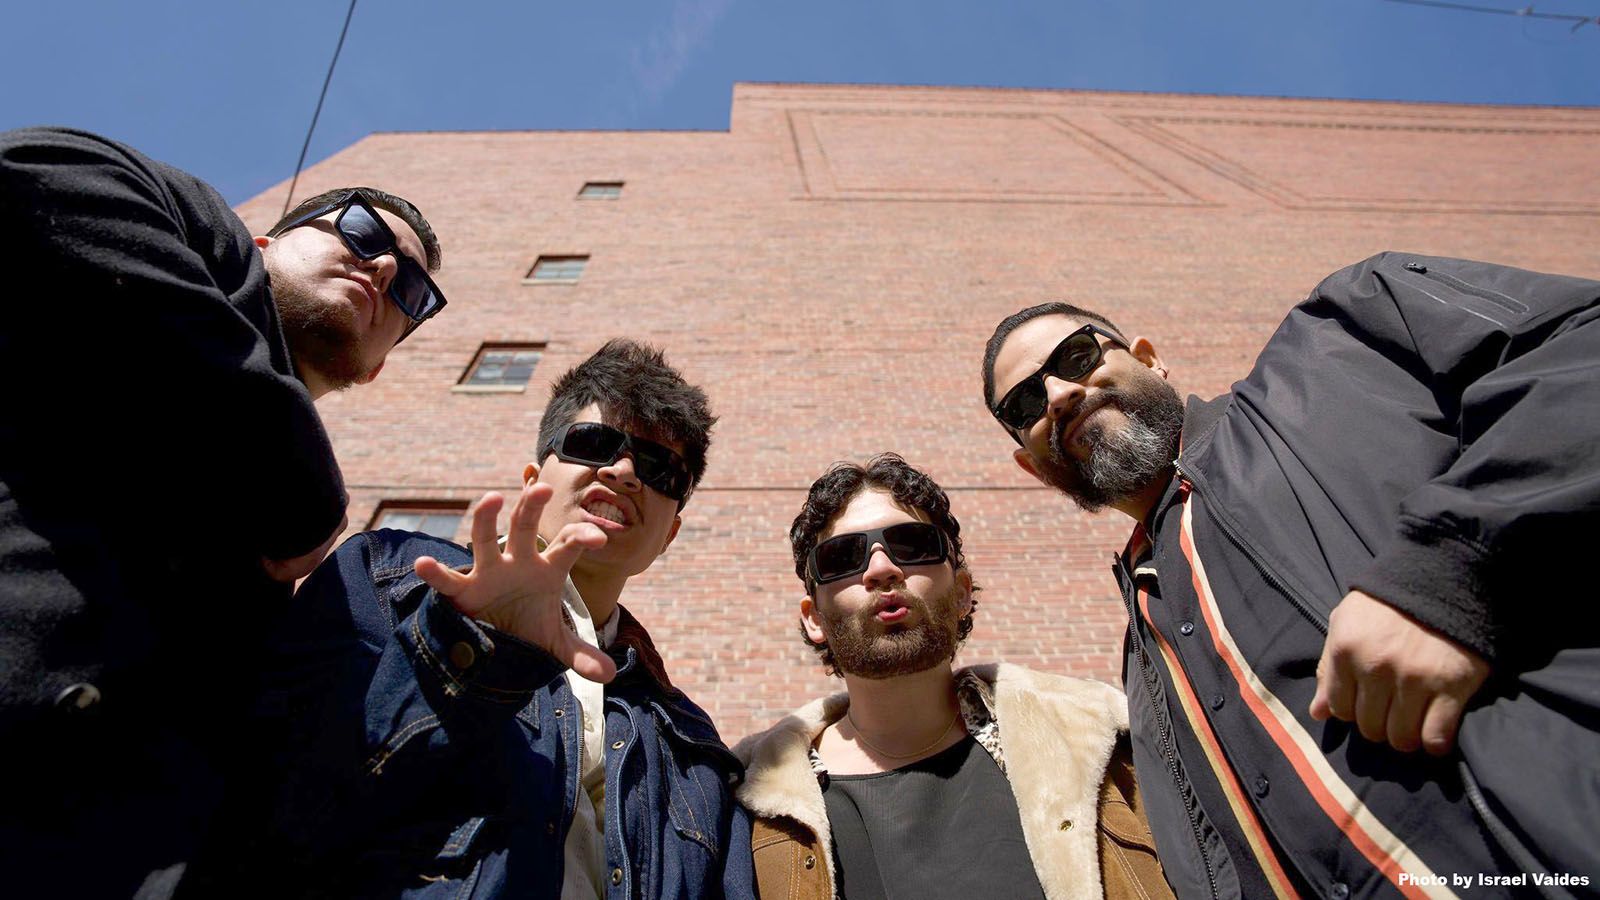 Los Electro will perform at The Club Room at The Clyde on Wednesday, Dec. 27.